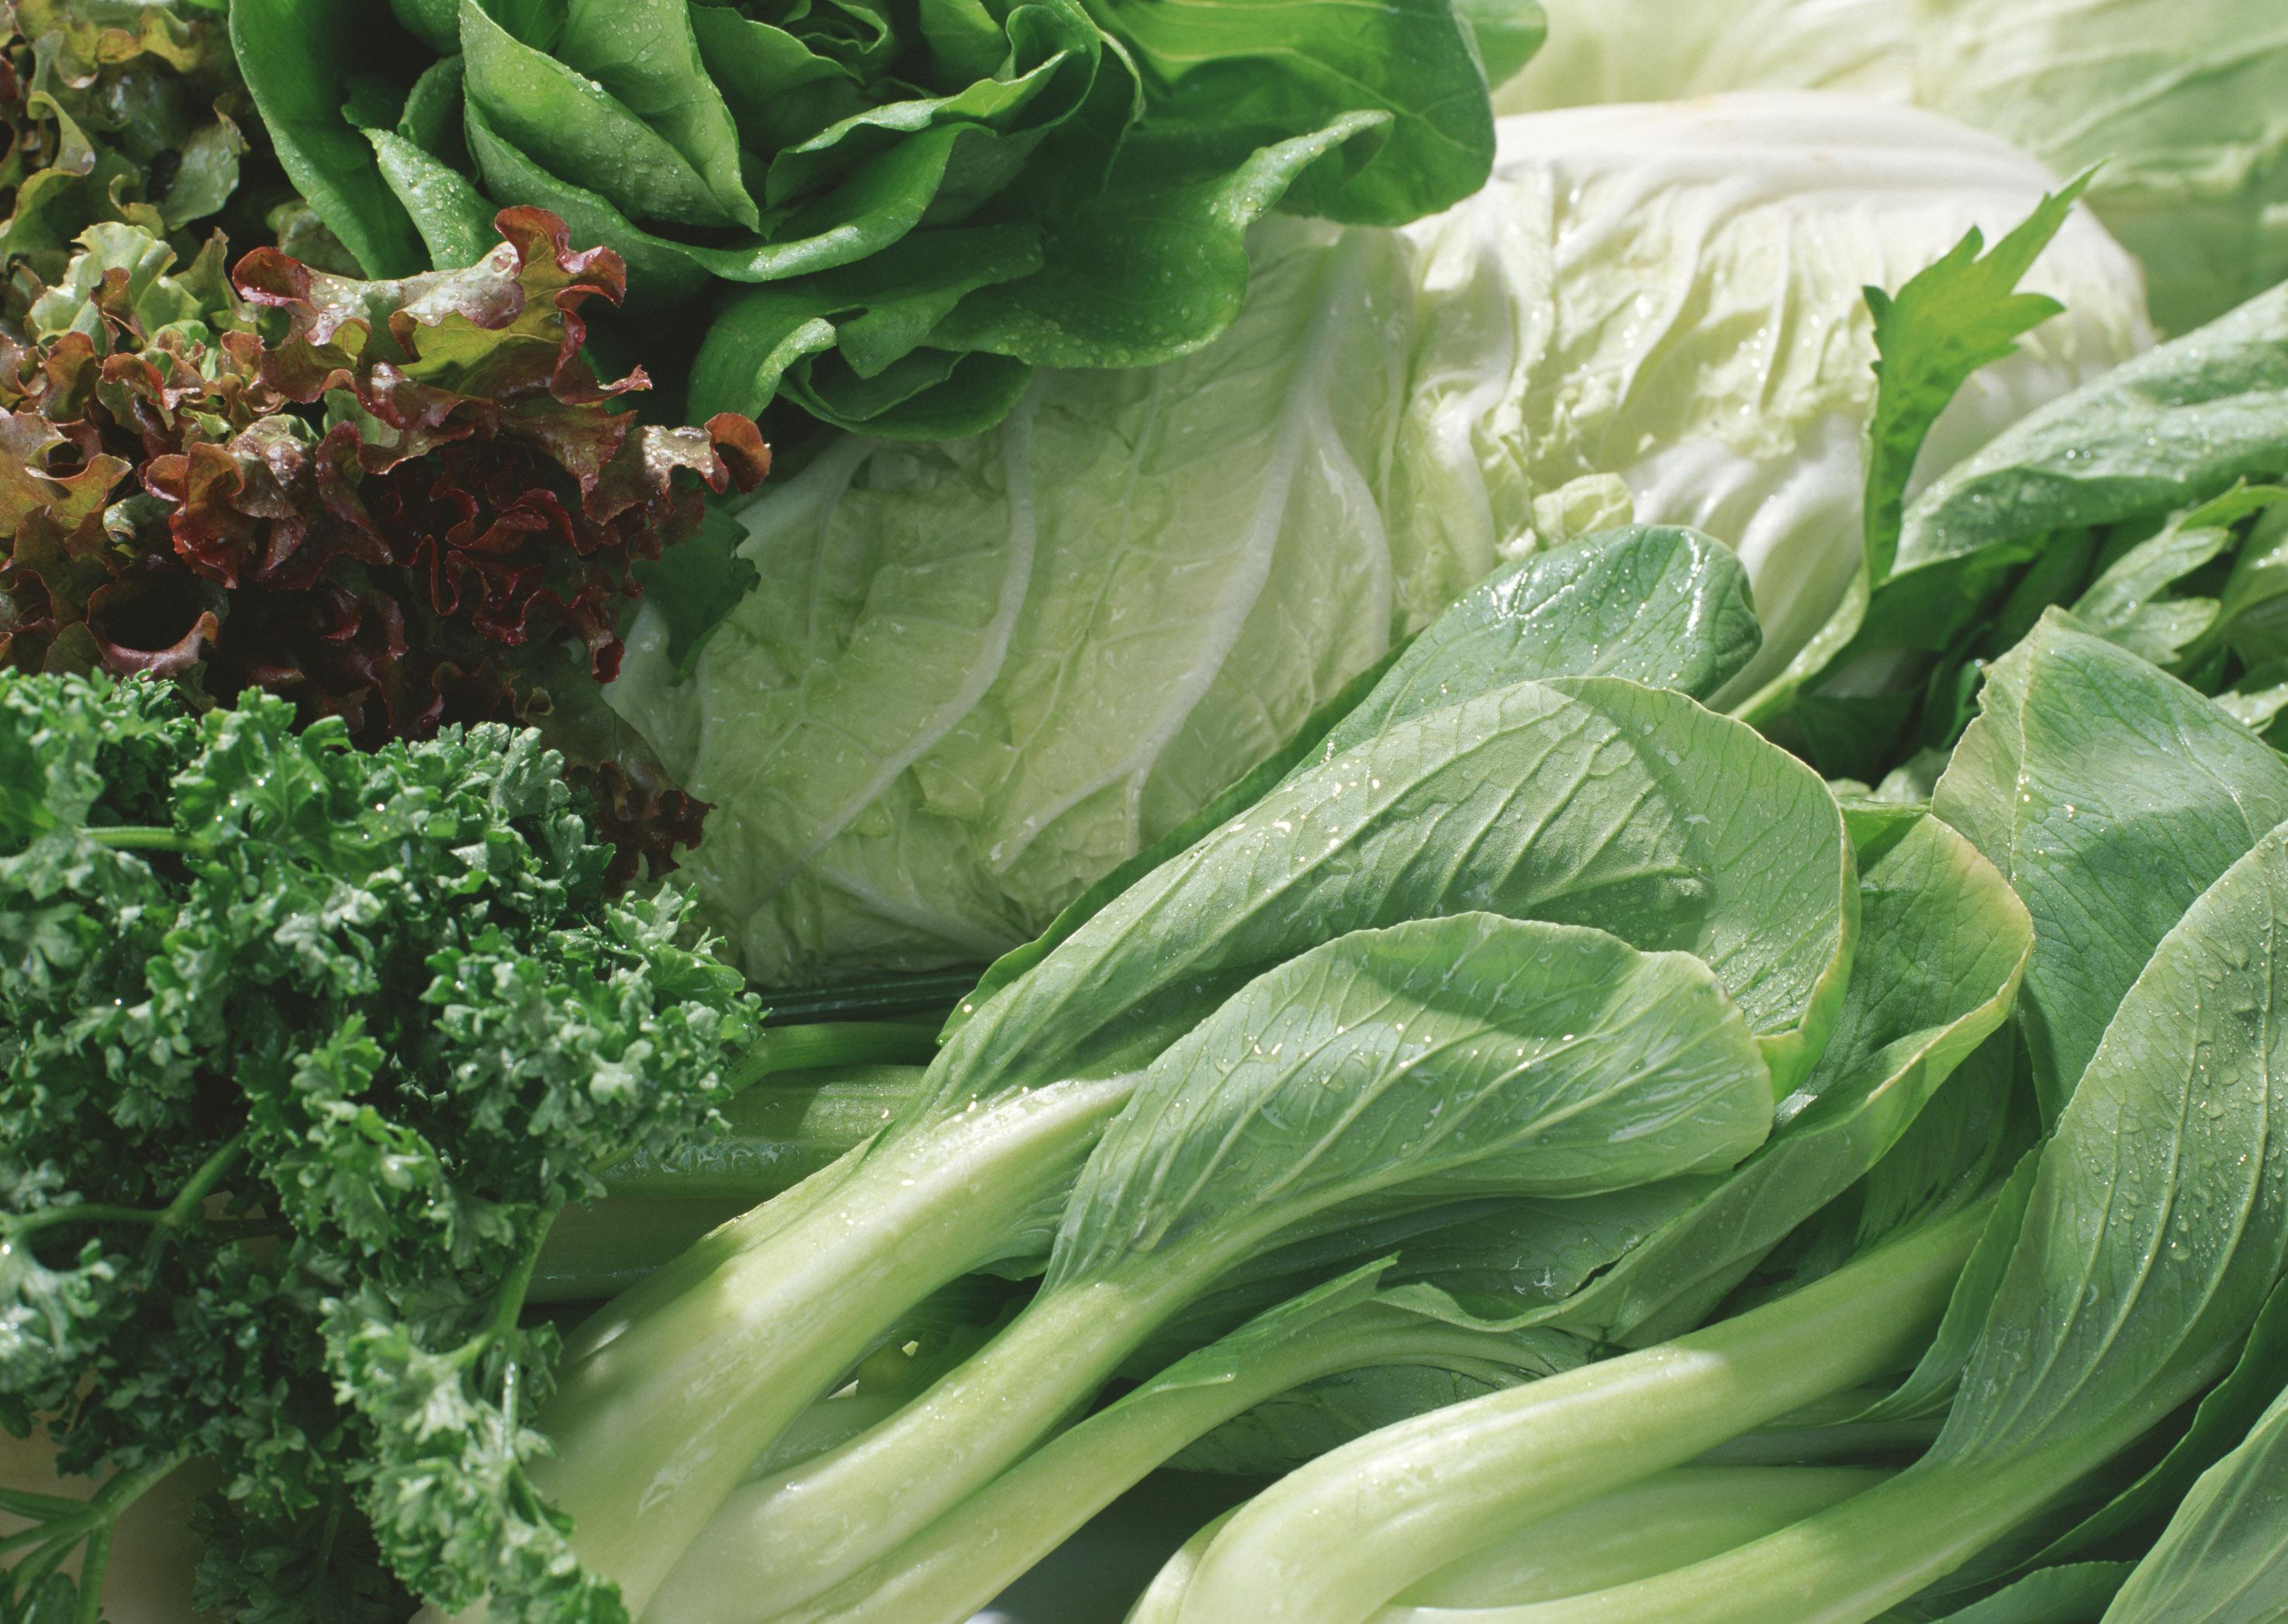 A variety of green leafy vegetables.